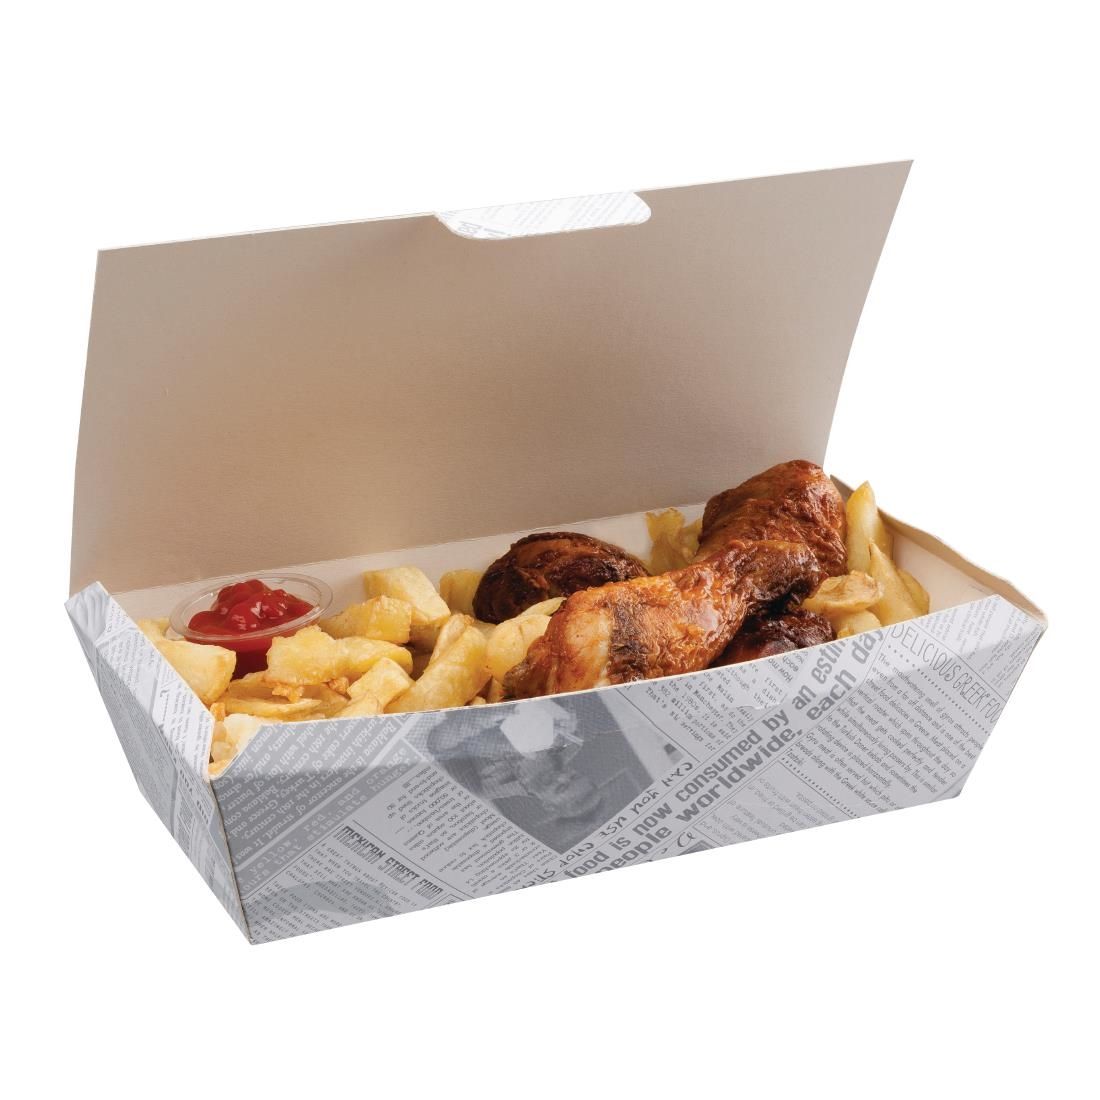 Colpac Compostable Food Boxes Newspaper Print 250mm (Pack of 150)  - CK882 JD Catering Equipment Solutions Ltd